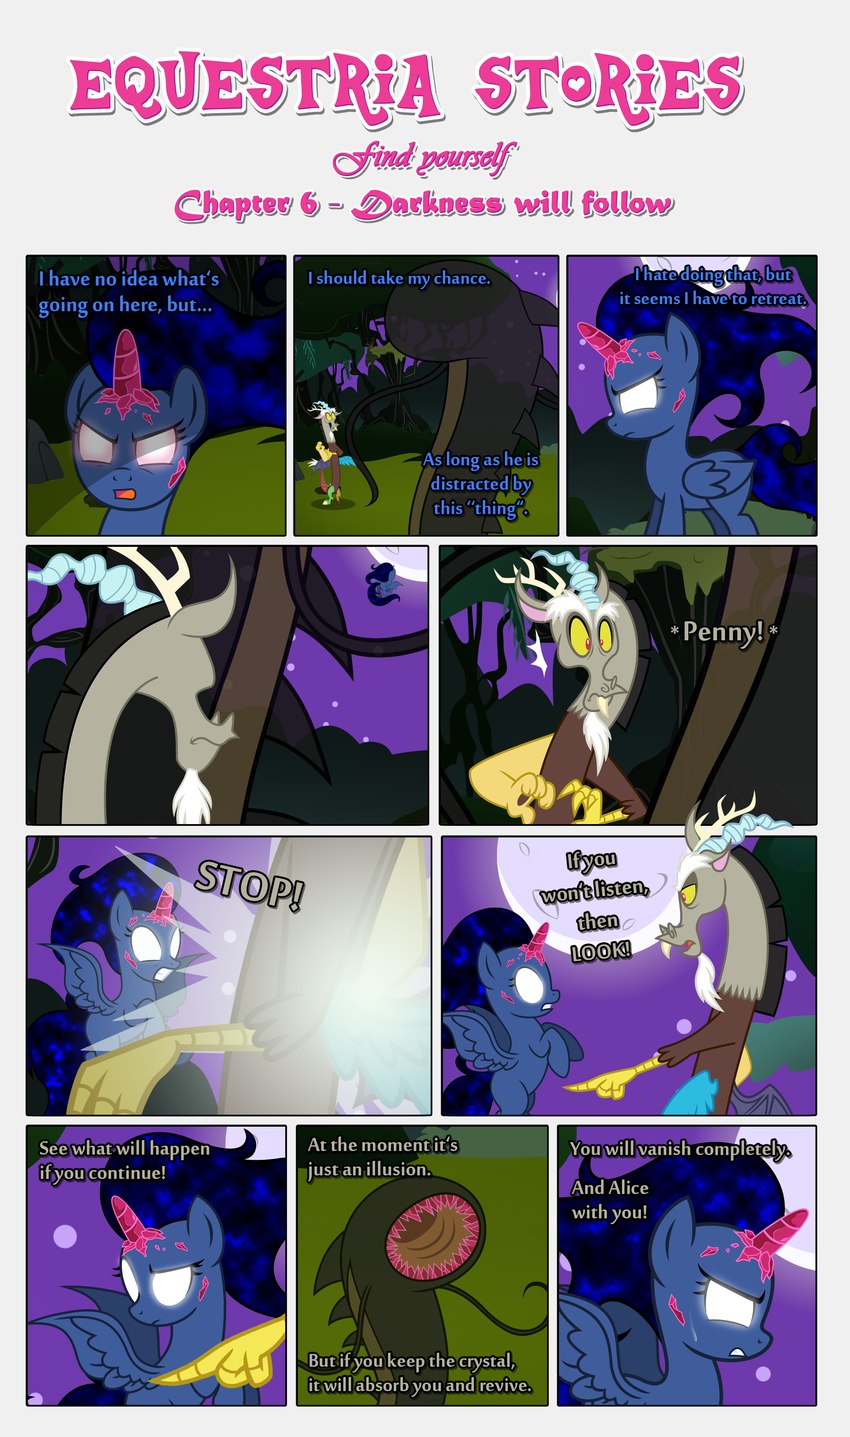 discord, fan character, and penumbra (friendship is magic and etc) created by estories